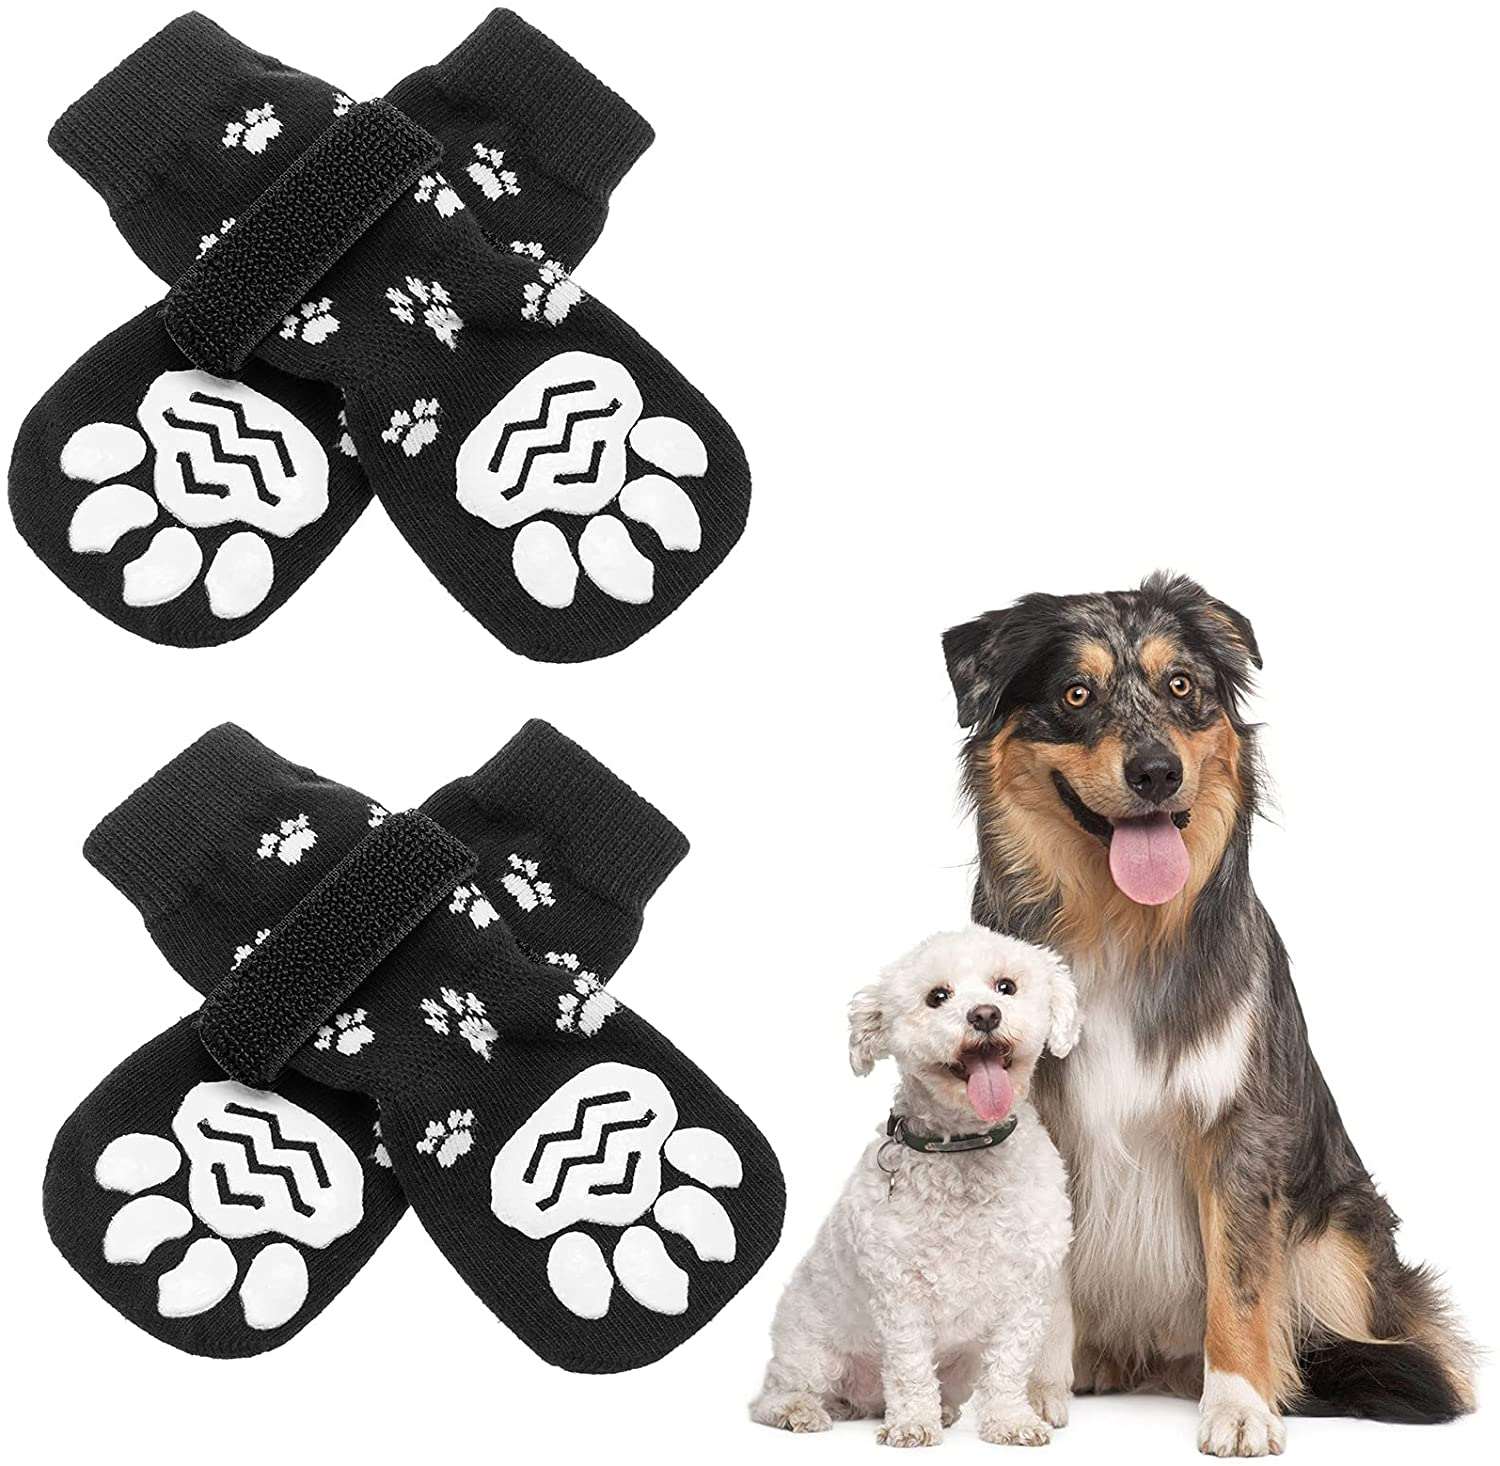  Roilpet Grippy Non-Slip Dog Socks to Prevent Licking Paws -  Strong Traction for Hardwood Floors, Senior Dogs, Paw Protector, Prevent  Scratching, Thick Anti Slip Dog Socks - Size Small 